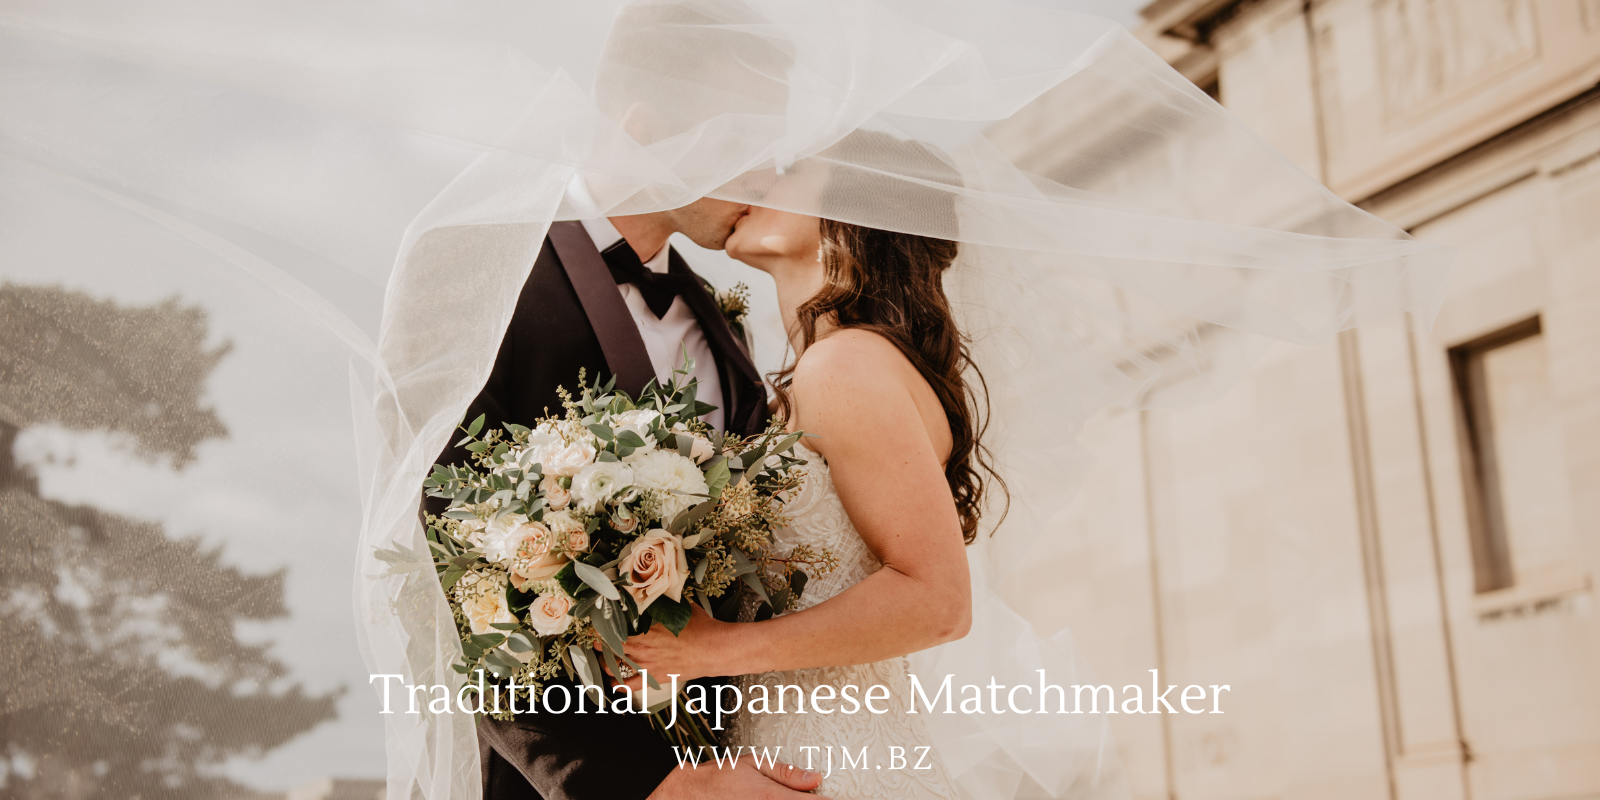 Reasons and Benefits to Select Matchmaking Service